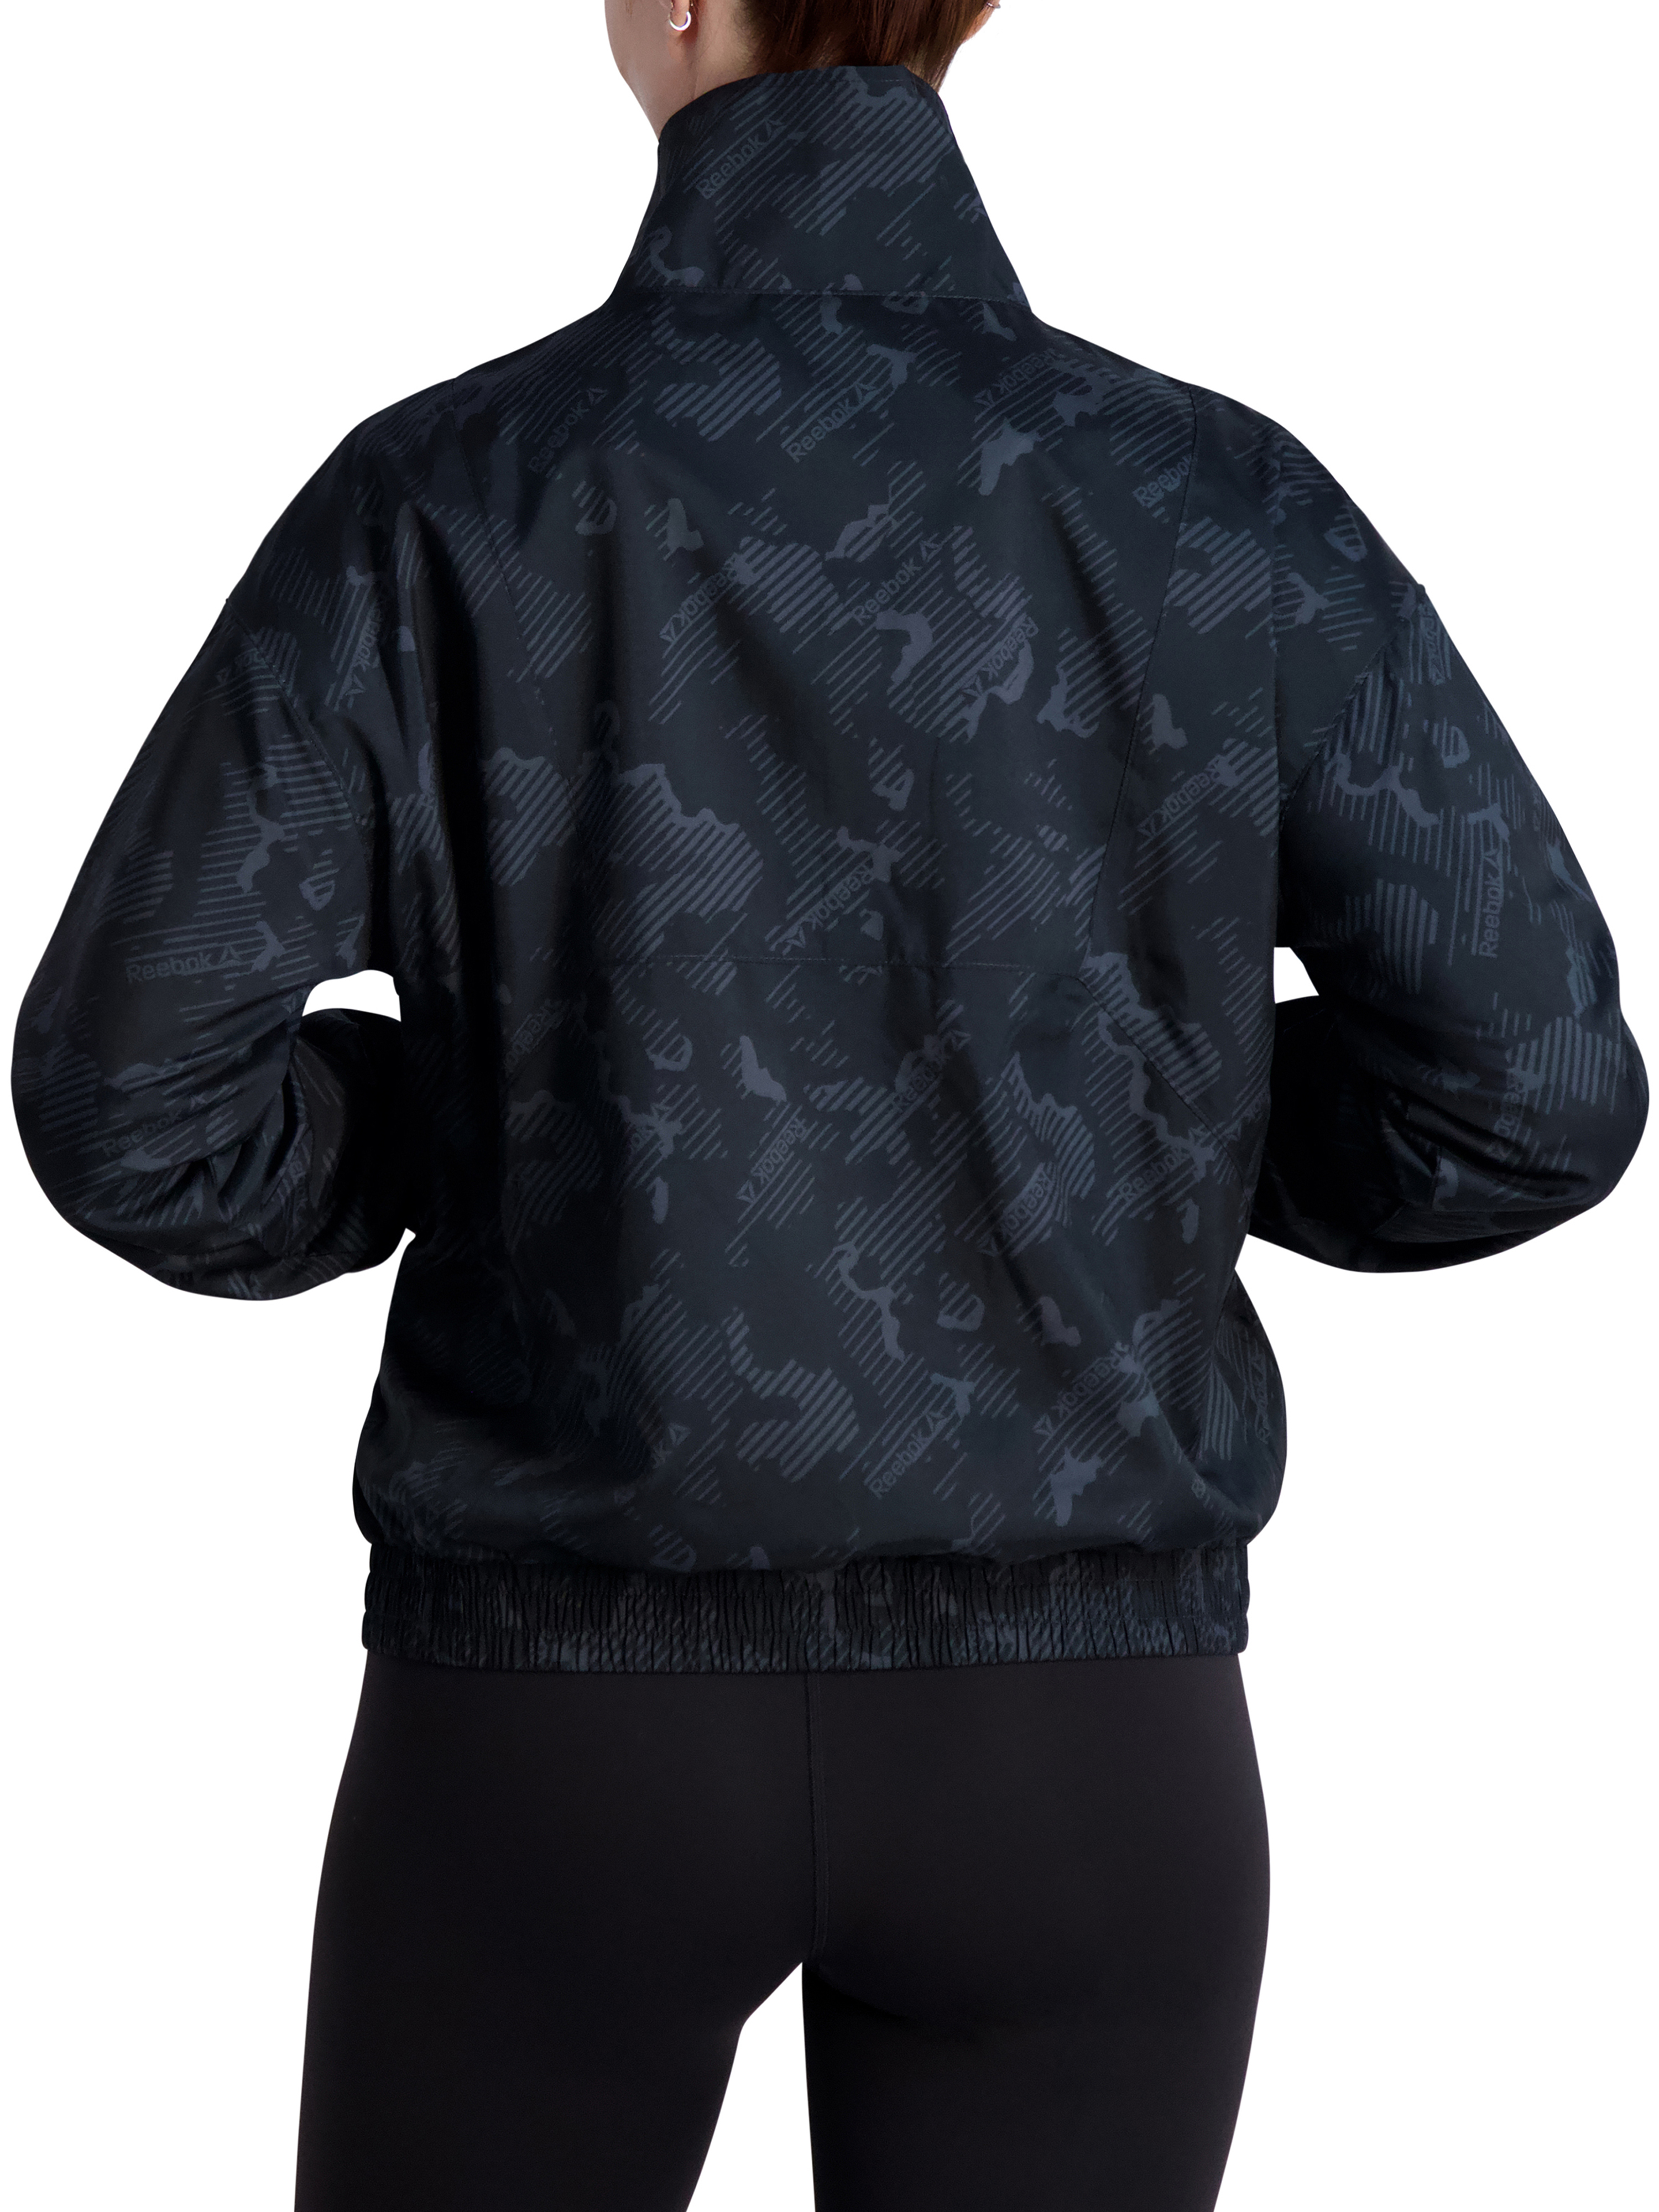 Reebok Women's Mesh Lined Printed Focus Track Jacket with Front Pockets and Front Flap - image 2 of 4